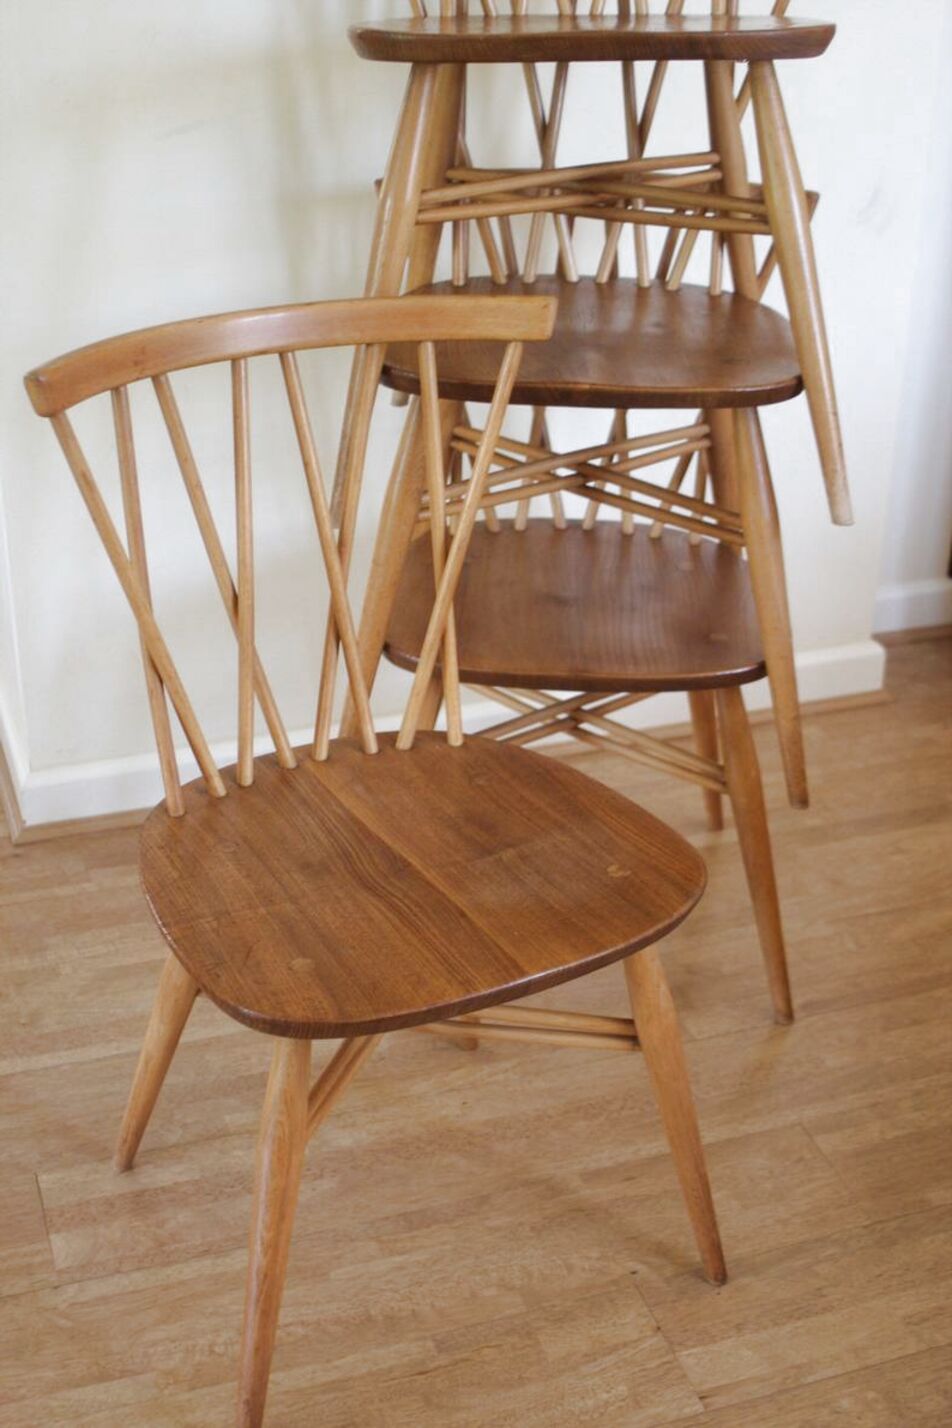 Ercol Chairs For Sale In Uk 97 Second Hand Ercol Chairs